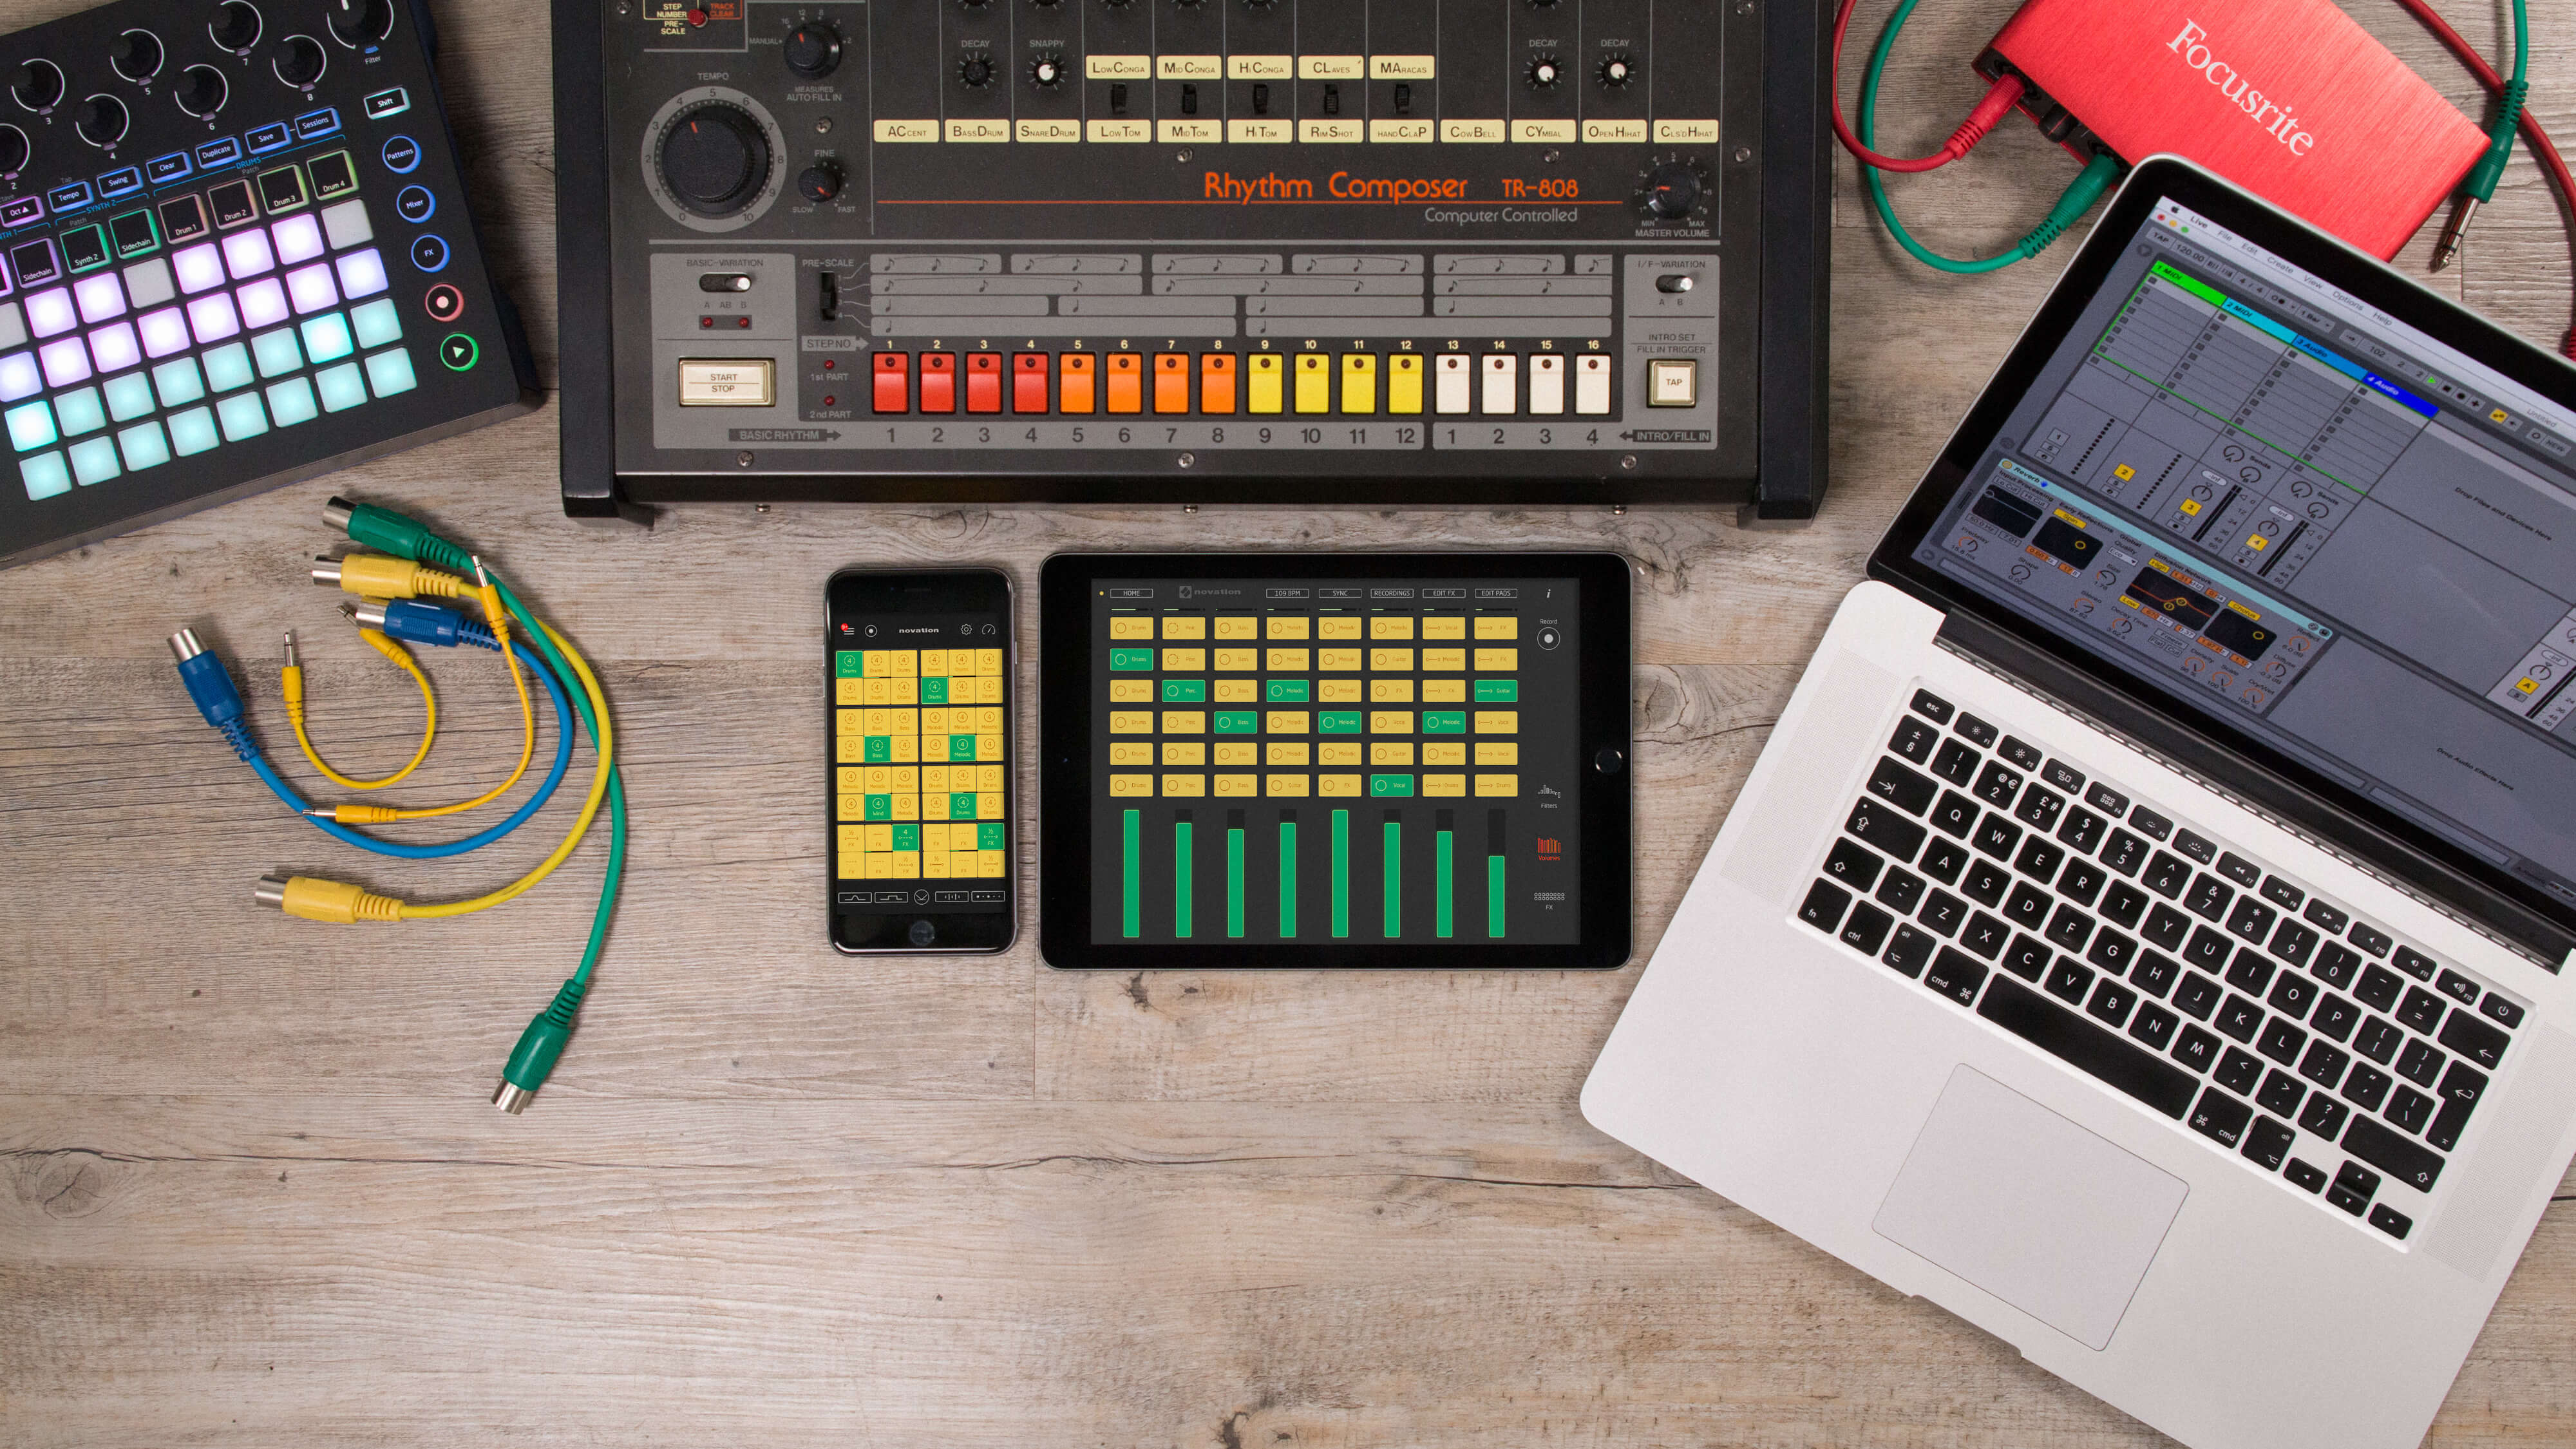 how to download ableton live 10 for free reddit